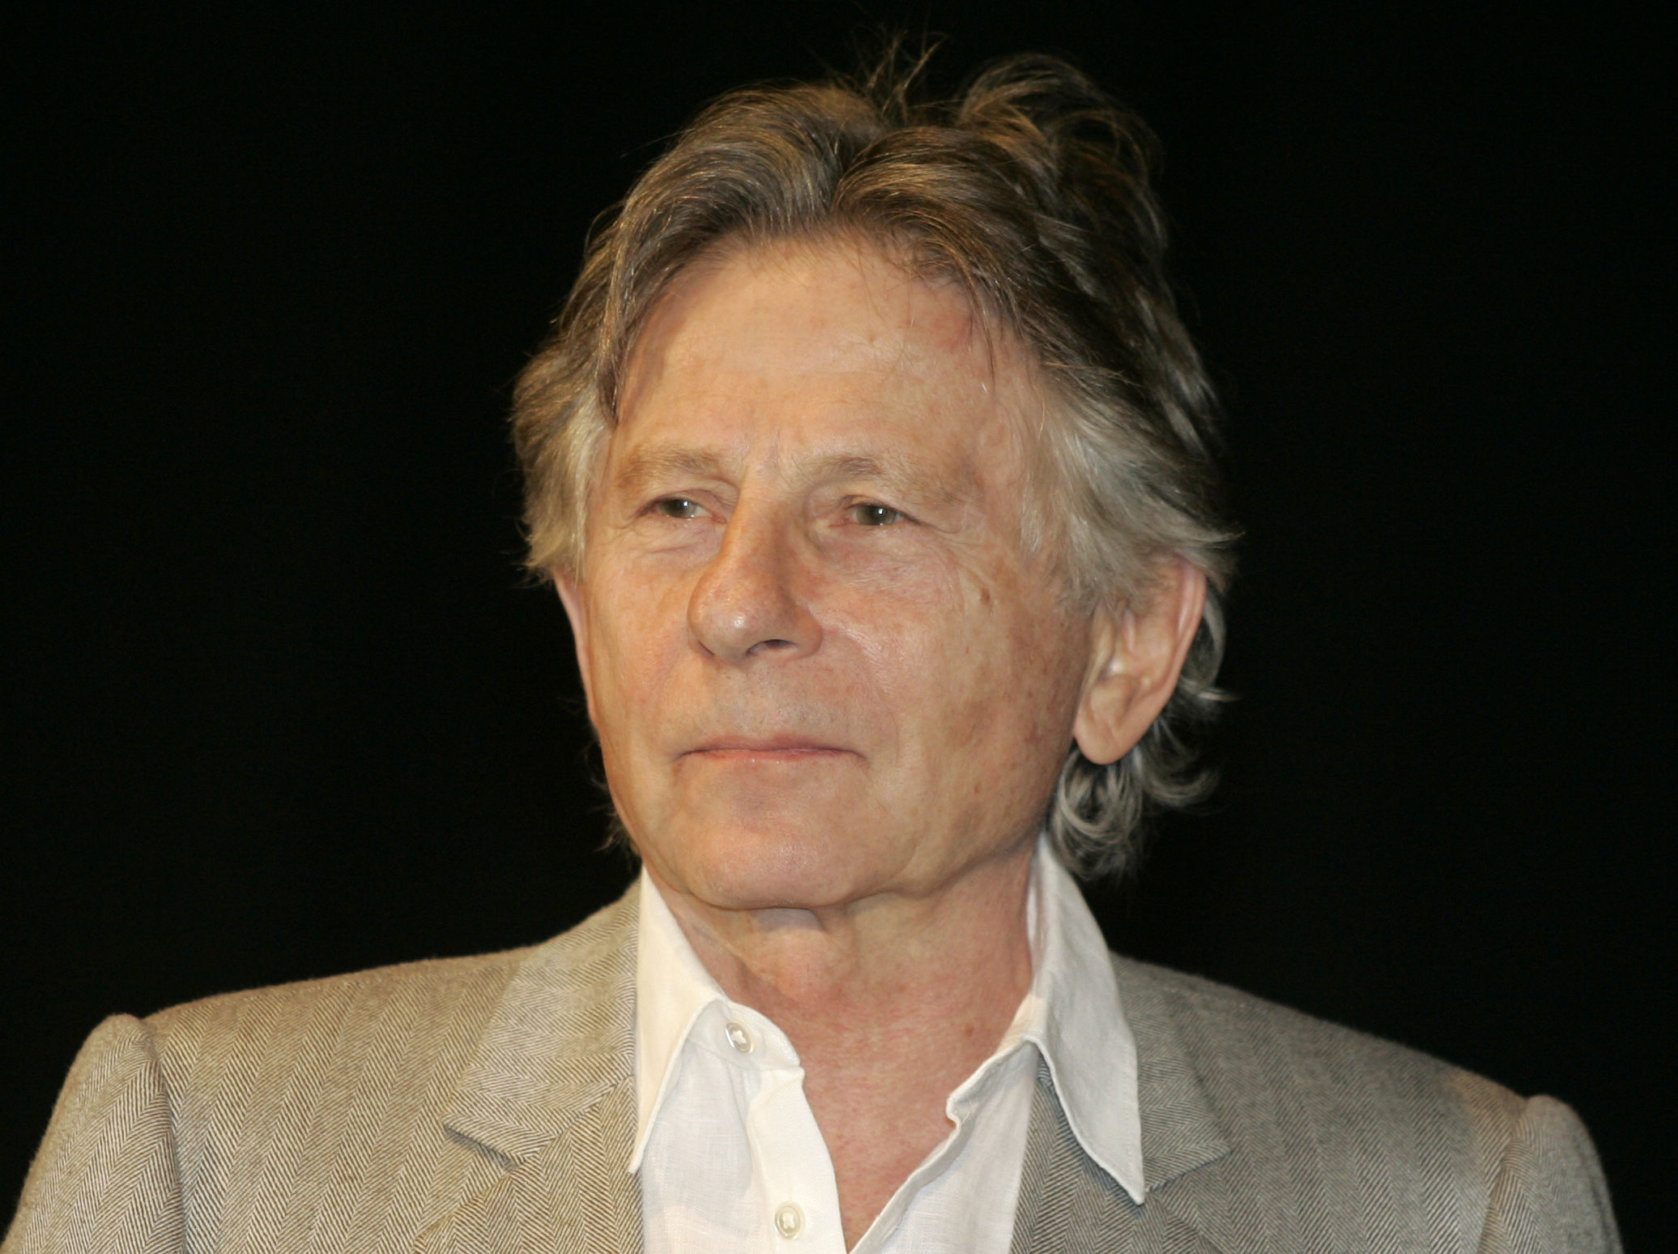 ** FILE ** In this Monday, Sept. 29, 2008 file photo Polish director Roman Polanski is seen in Oberhausen, western Germany. Organizers of the Zurich Film Festival say director Roman Polanski has been taken into custody on a 31-year-old U.S. arrest warrant. The organizers say Polanski was detained by police Saturday Sept. 26, 2009. (AP Photo/Roberto Pfeil, File)